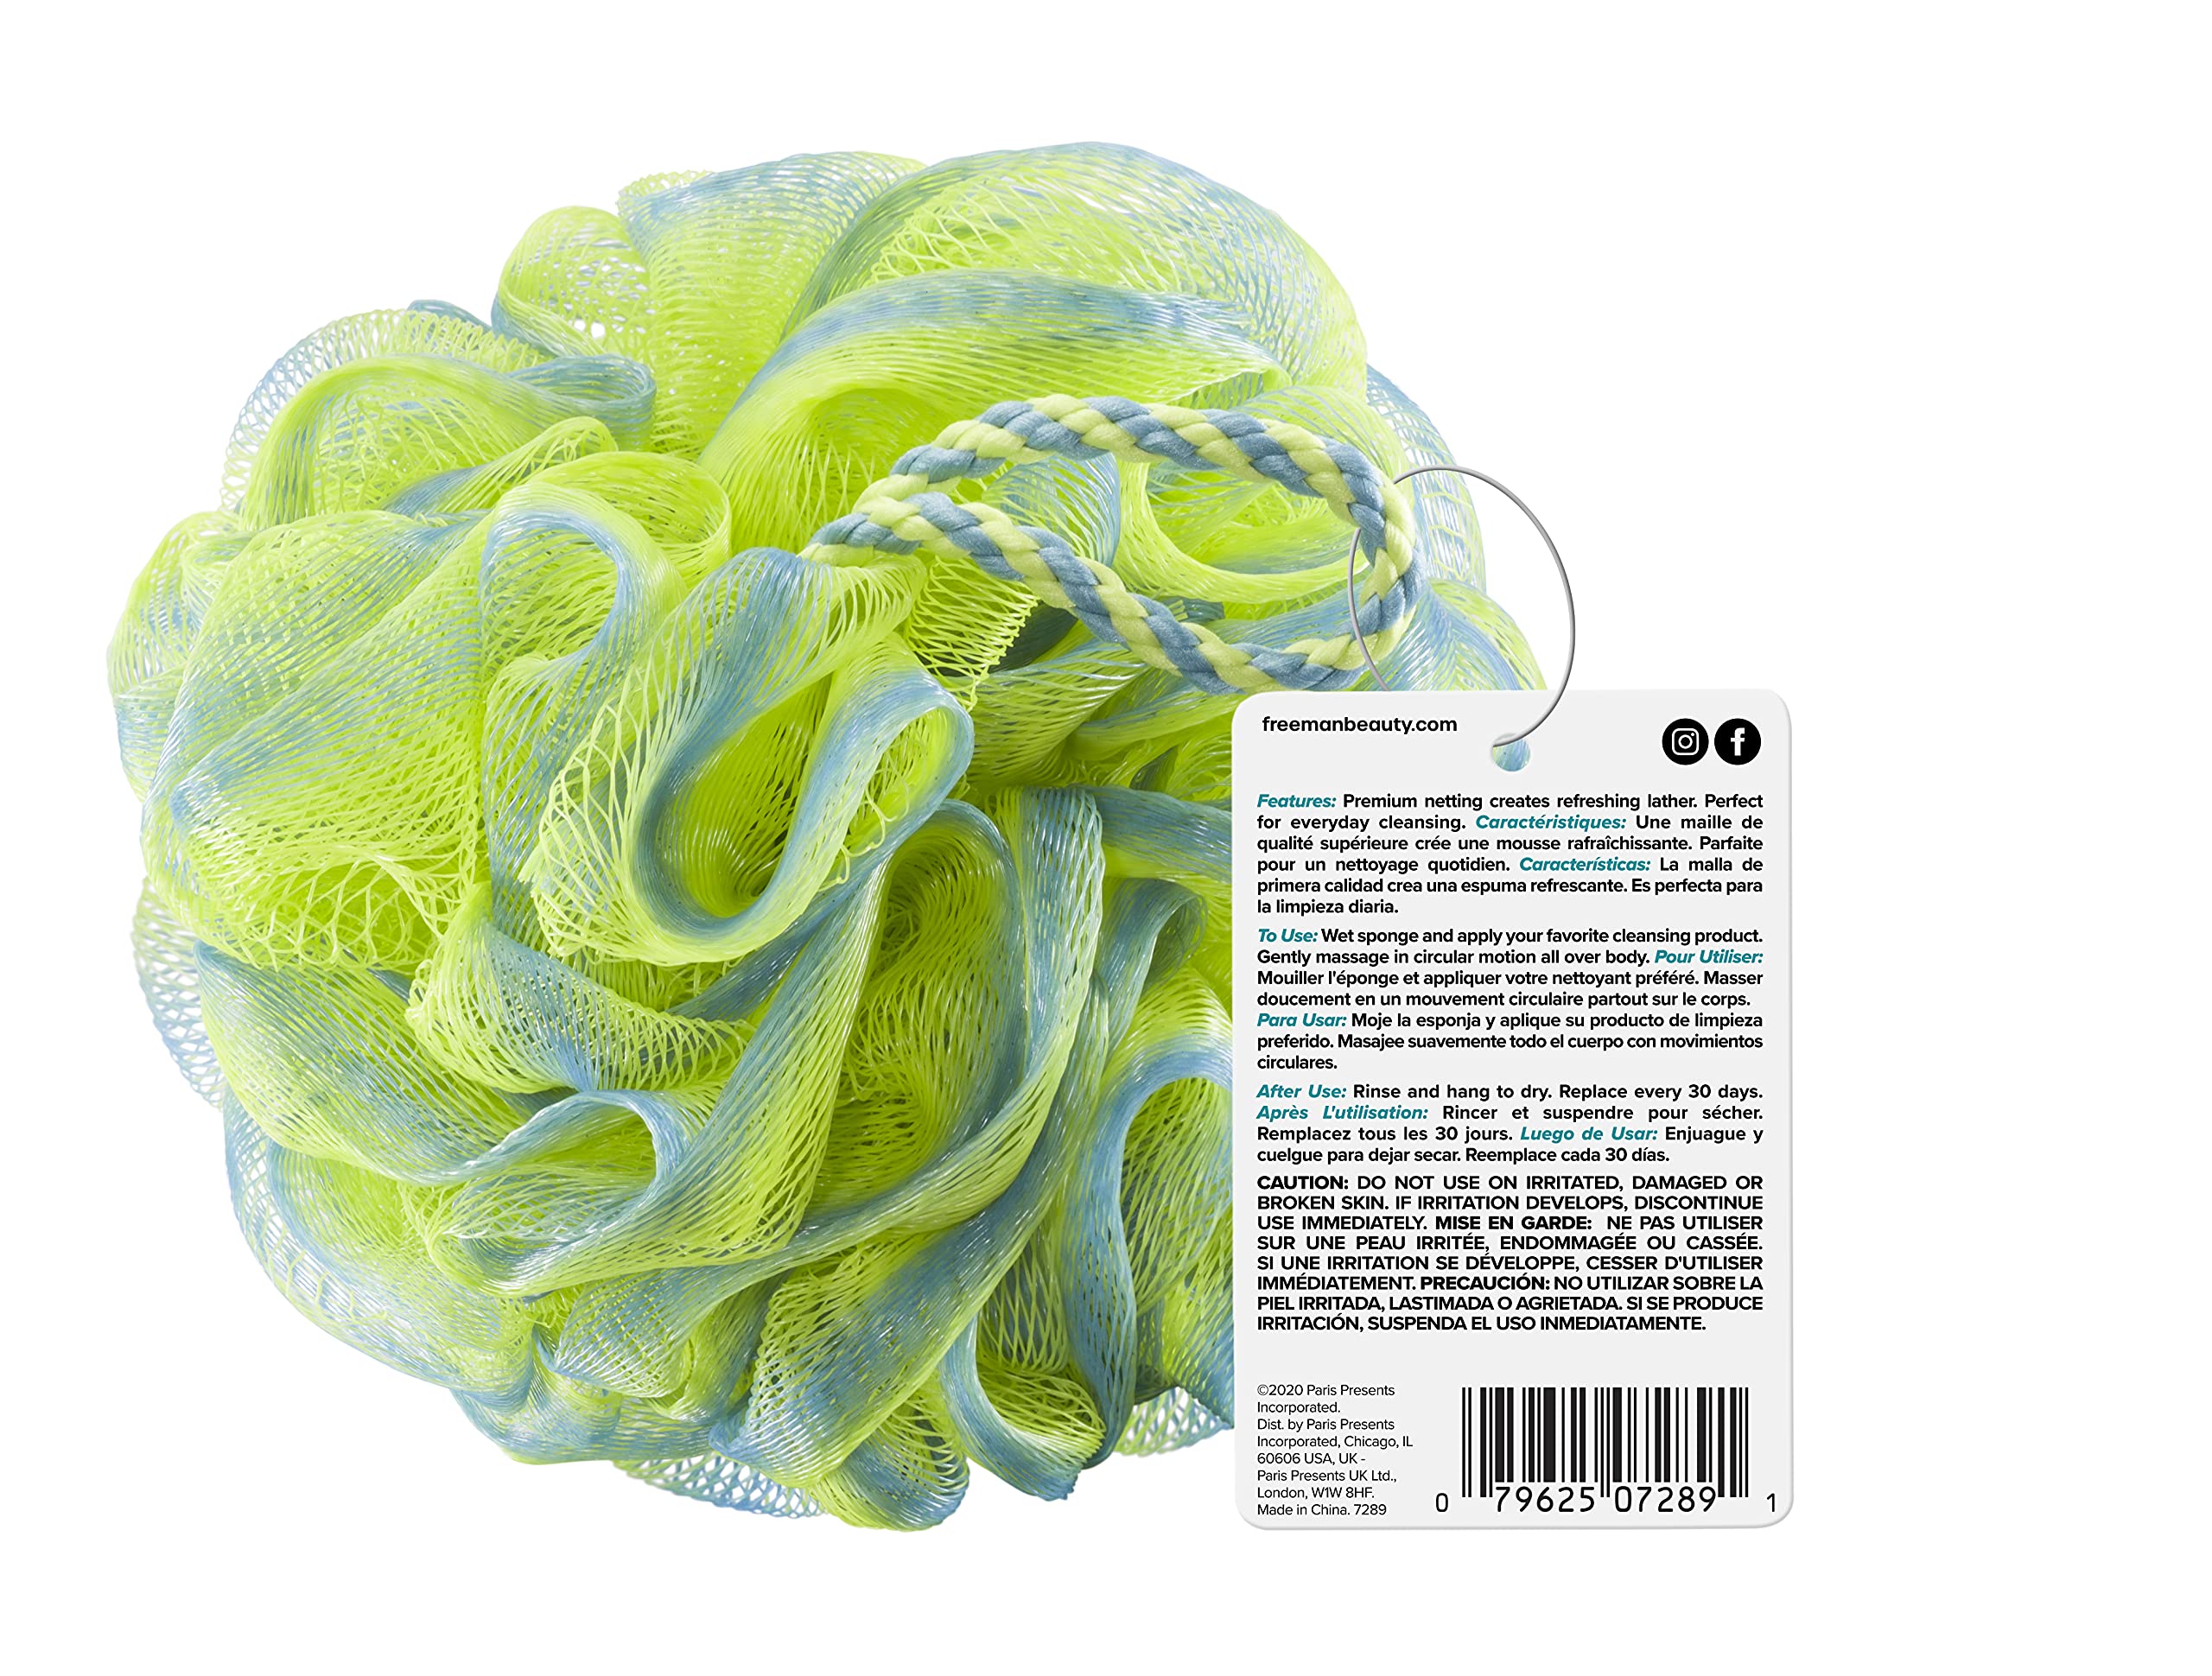 Freeman Jumbo Net Sponges, Exfoliating & Deep Cleaning, Body Sponges for Bath & Shower, Cleansing Loofah for Men & Women, Exfoliating & Lathering Large Poufs, Multicolored, 1 Count